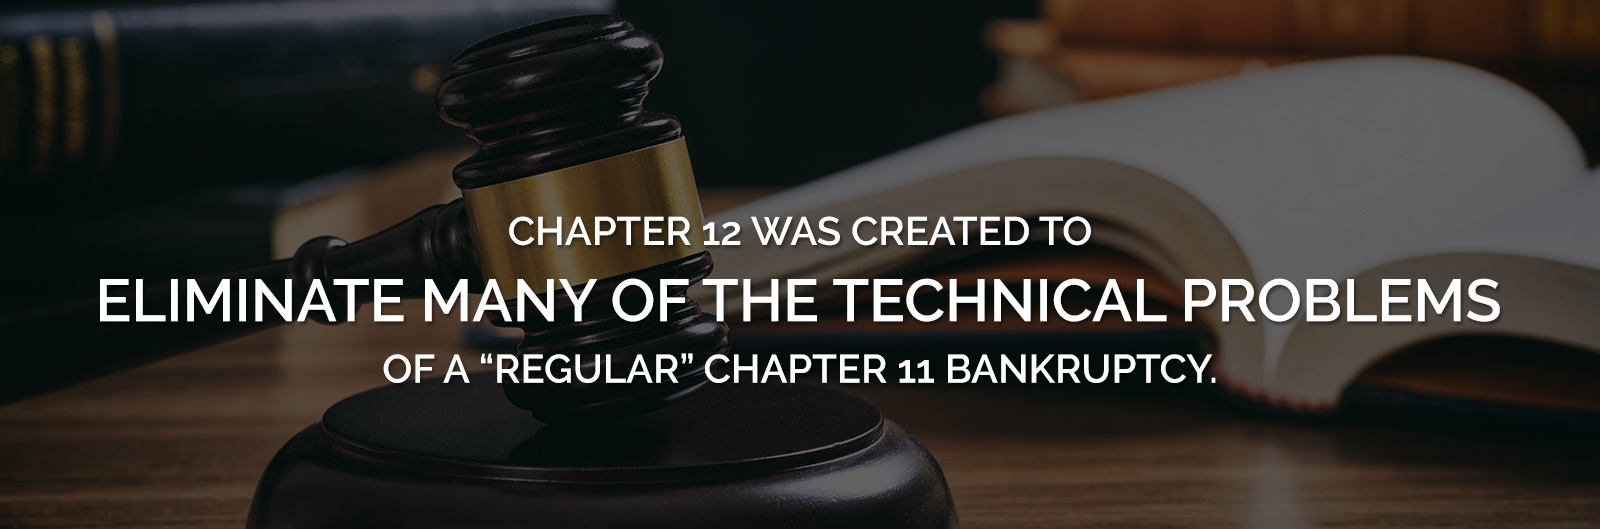 Chapter 12 Bankruptcy Services by Sam Calvert, Attorney at Law - Bankruptcy Law Firm in St. Cloud